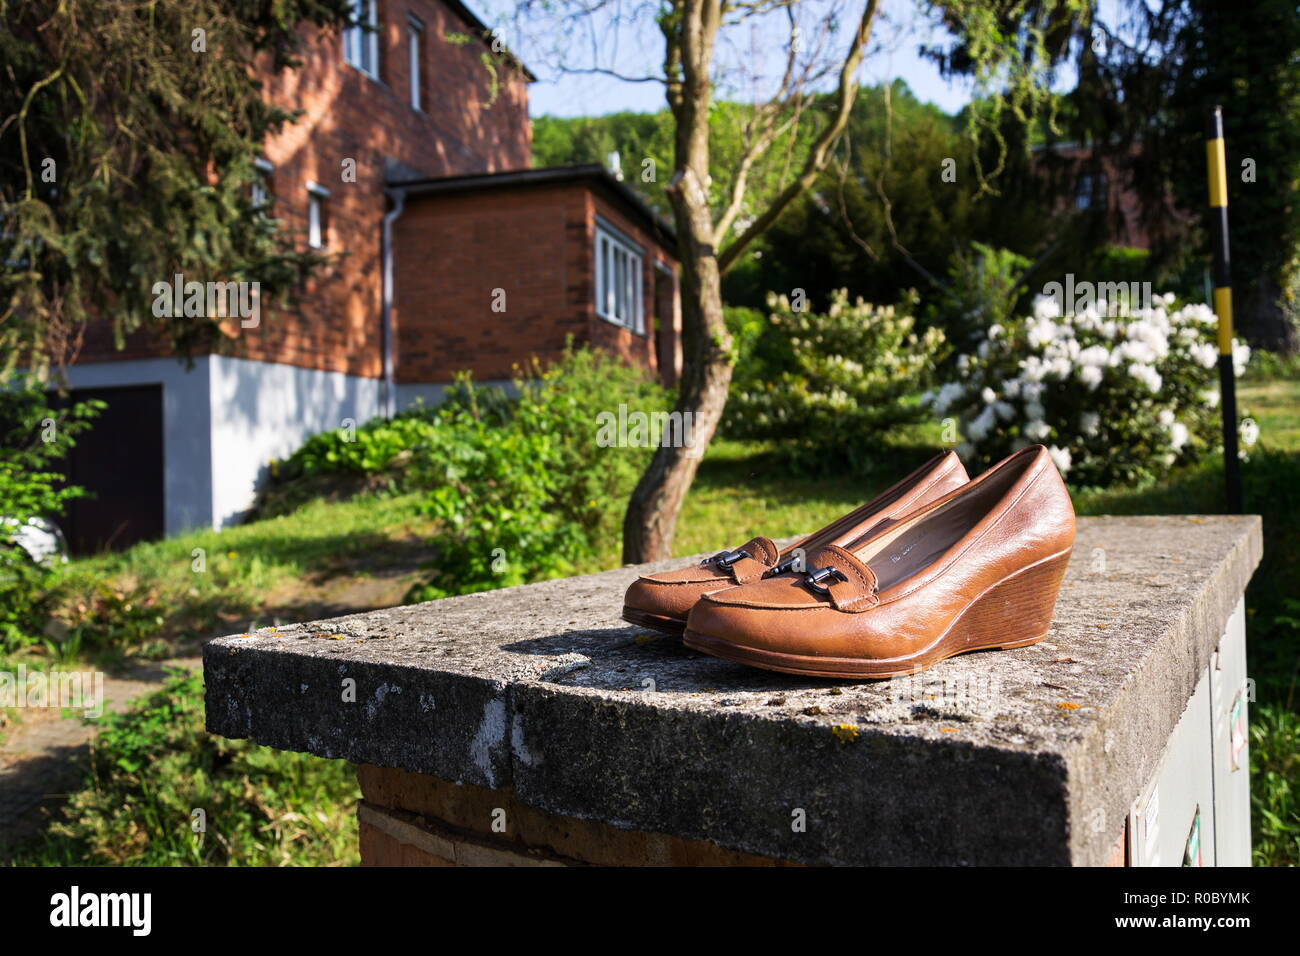 Old vintage shoes with typified red brick family Bata house in background, Zlin, Moravia, Czech Republic, sunny summer day Stock Photo